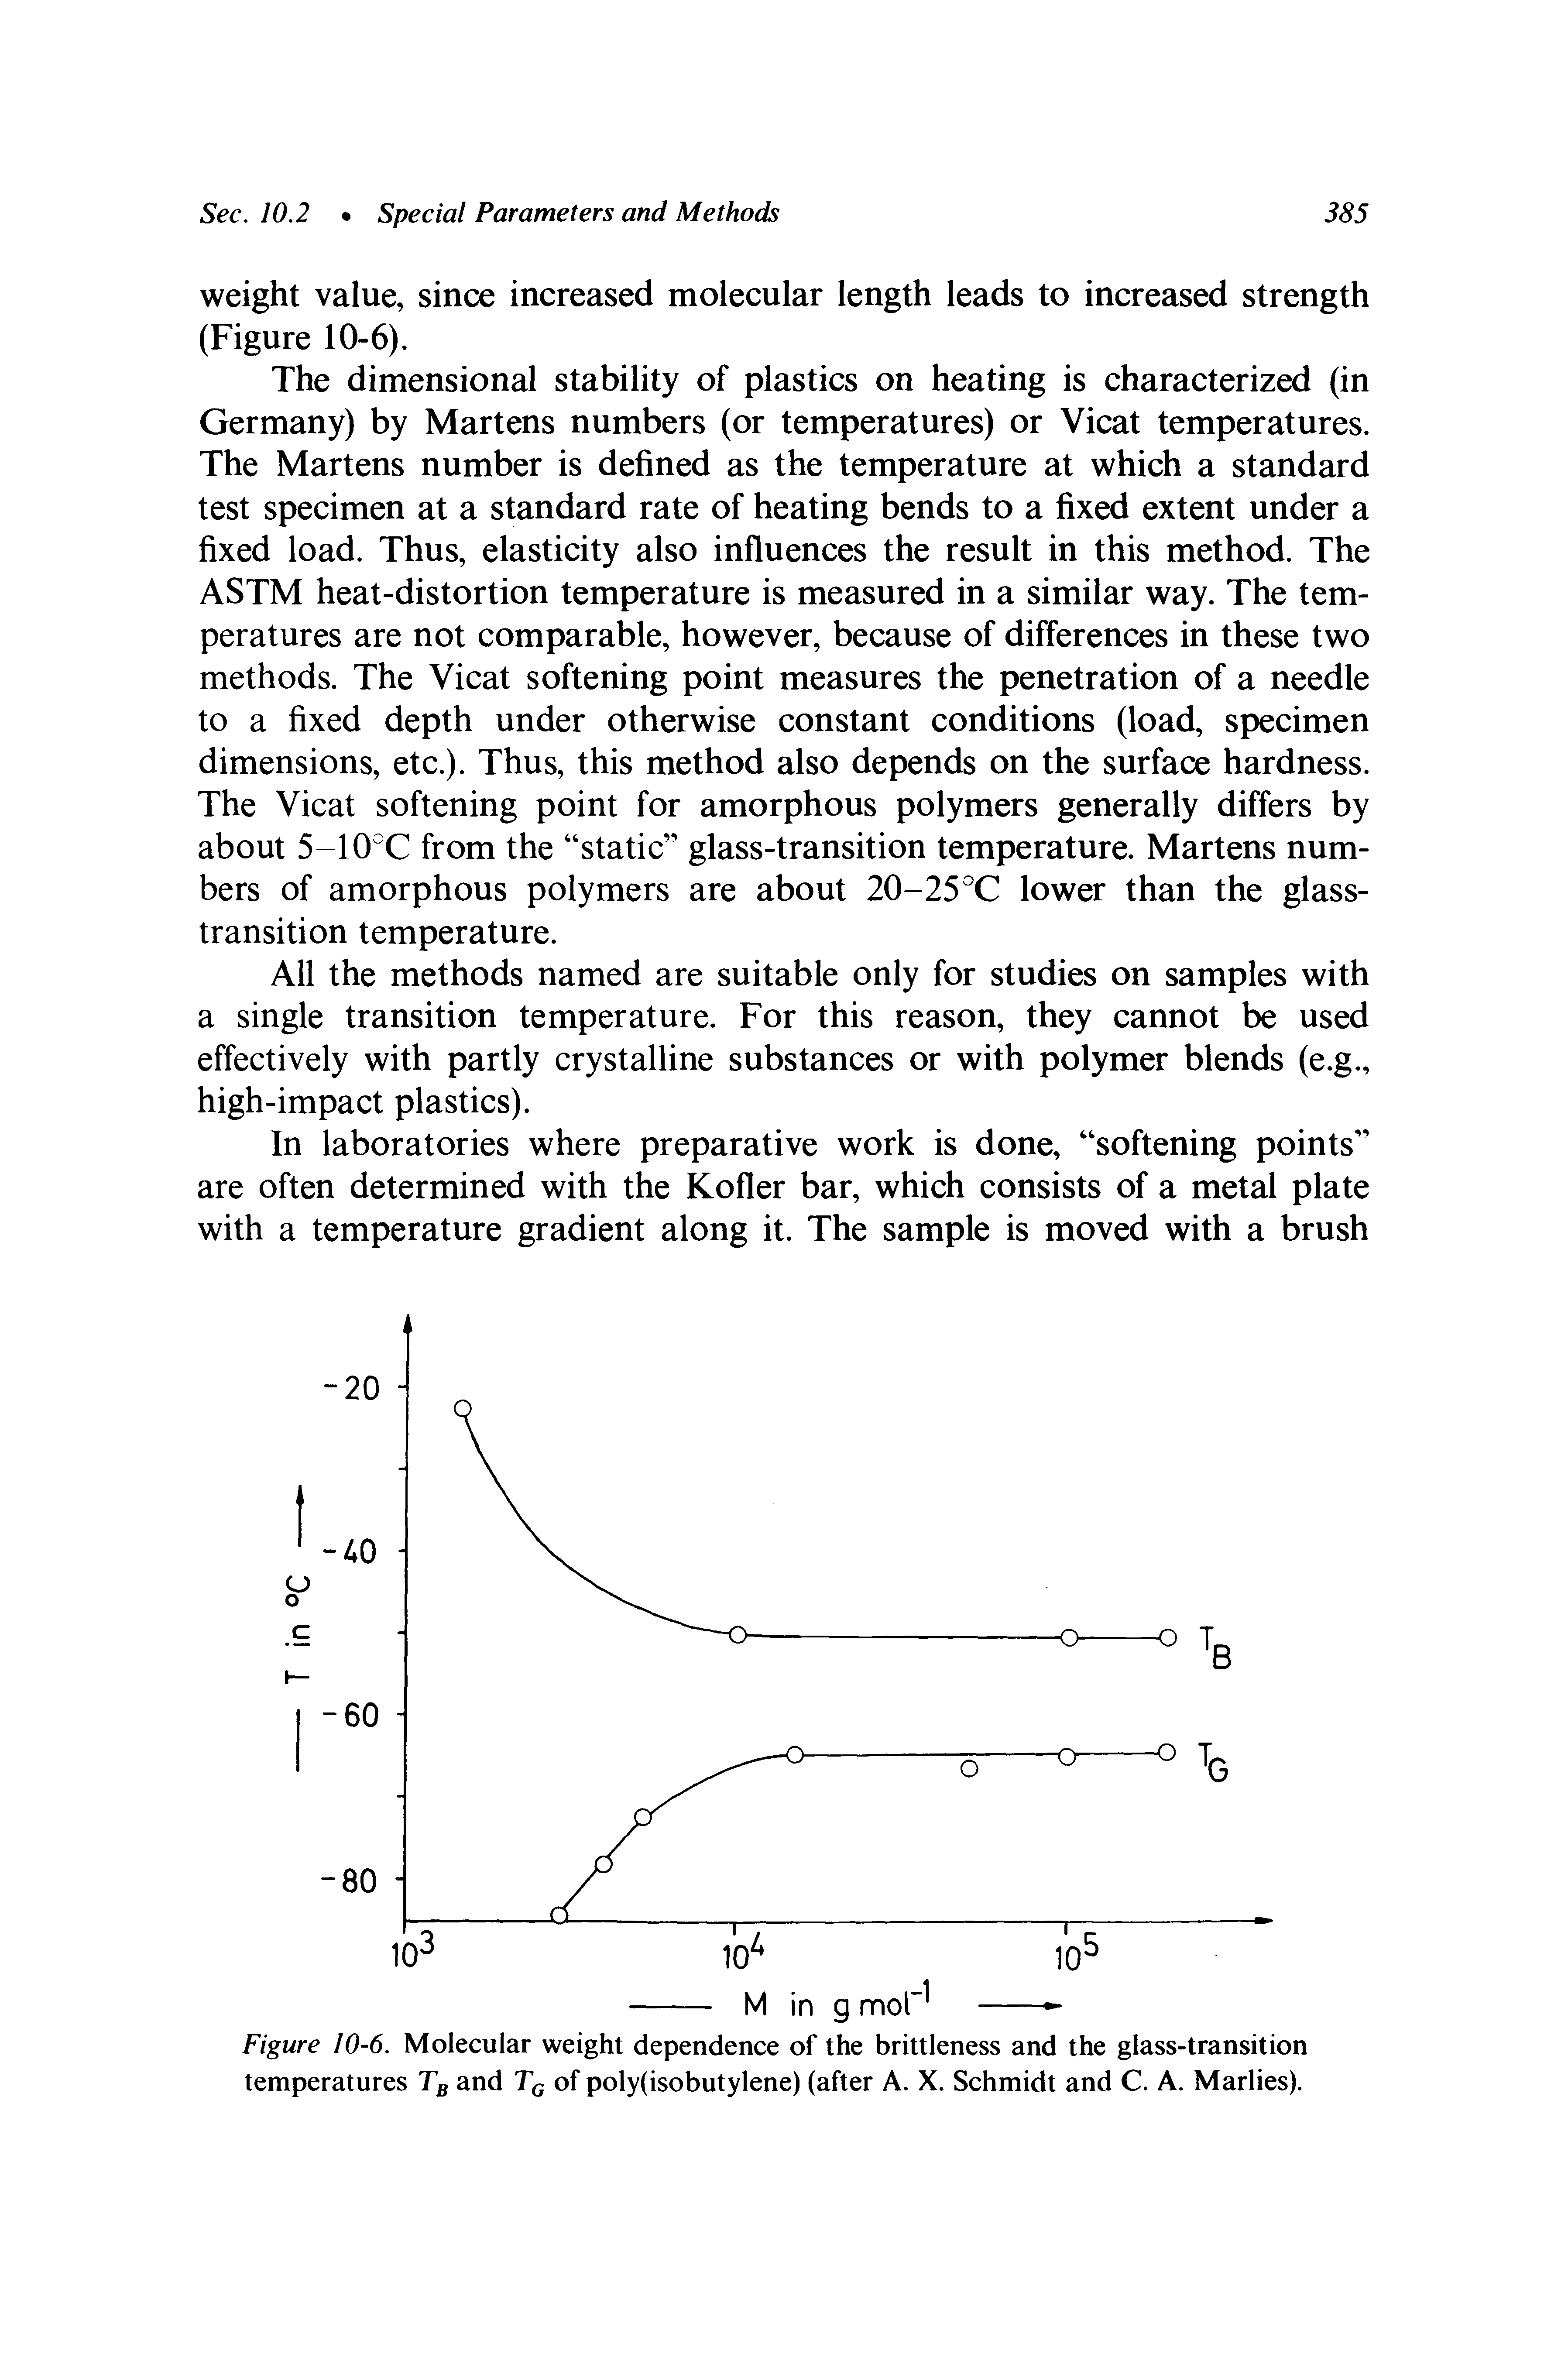 Figure 10-6. Molecular weight dependence of the brittleness and the glass-transition temperatures Tg and Tq of poly(isobutylene) (after A. X. Schmidt and C. A. Marlies).